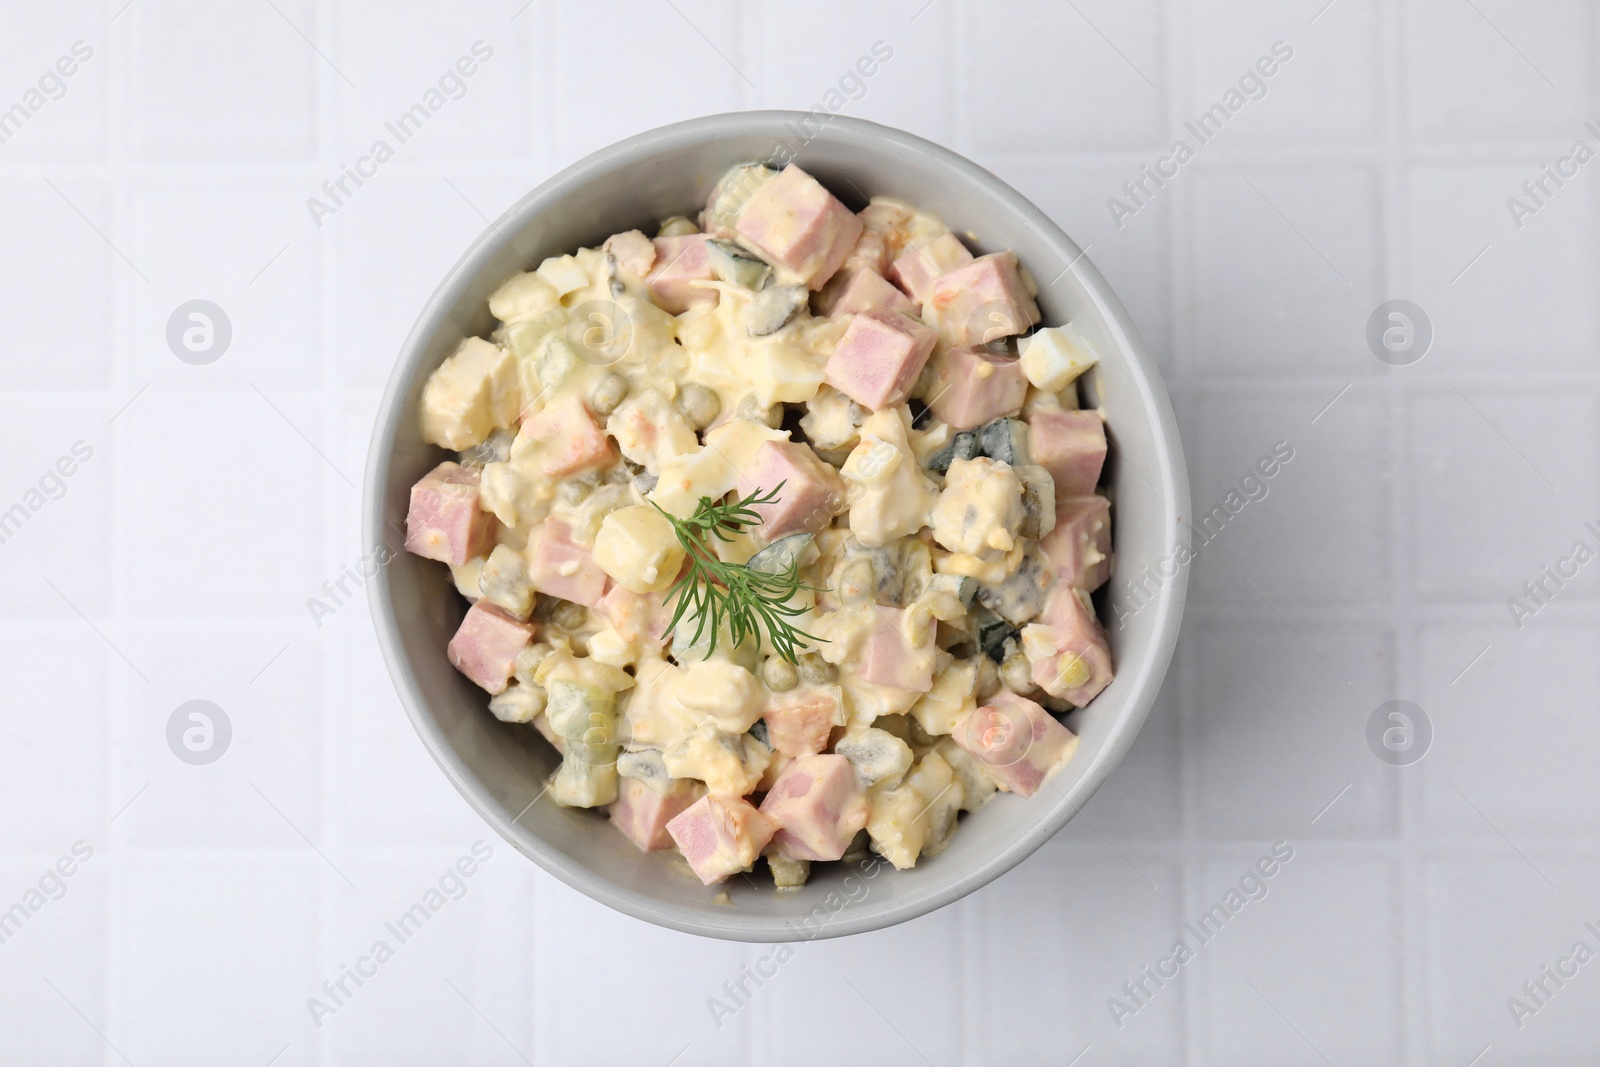 Photo of Tasty Olivier salad with boiled sausage in bowl on white tiled table, top view